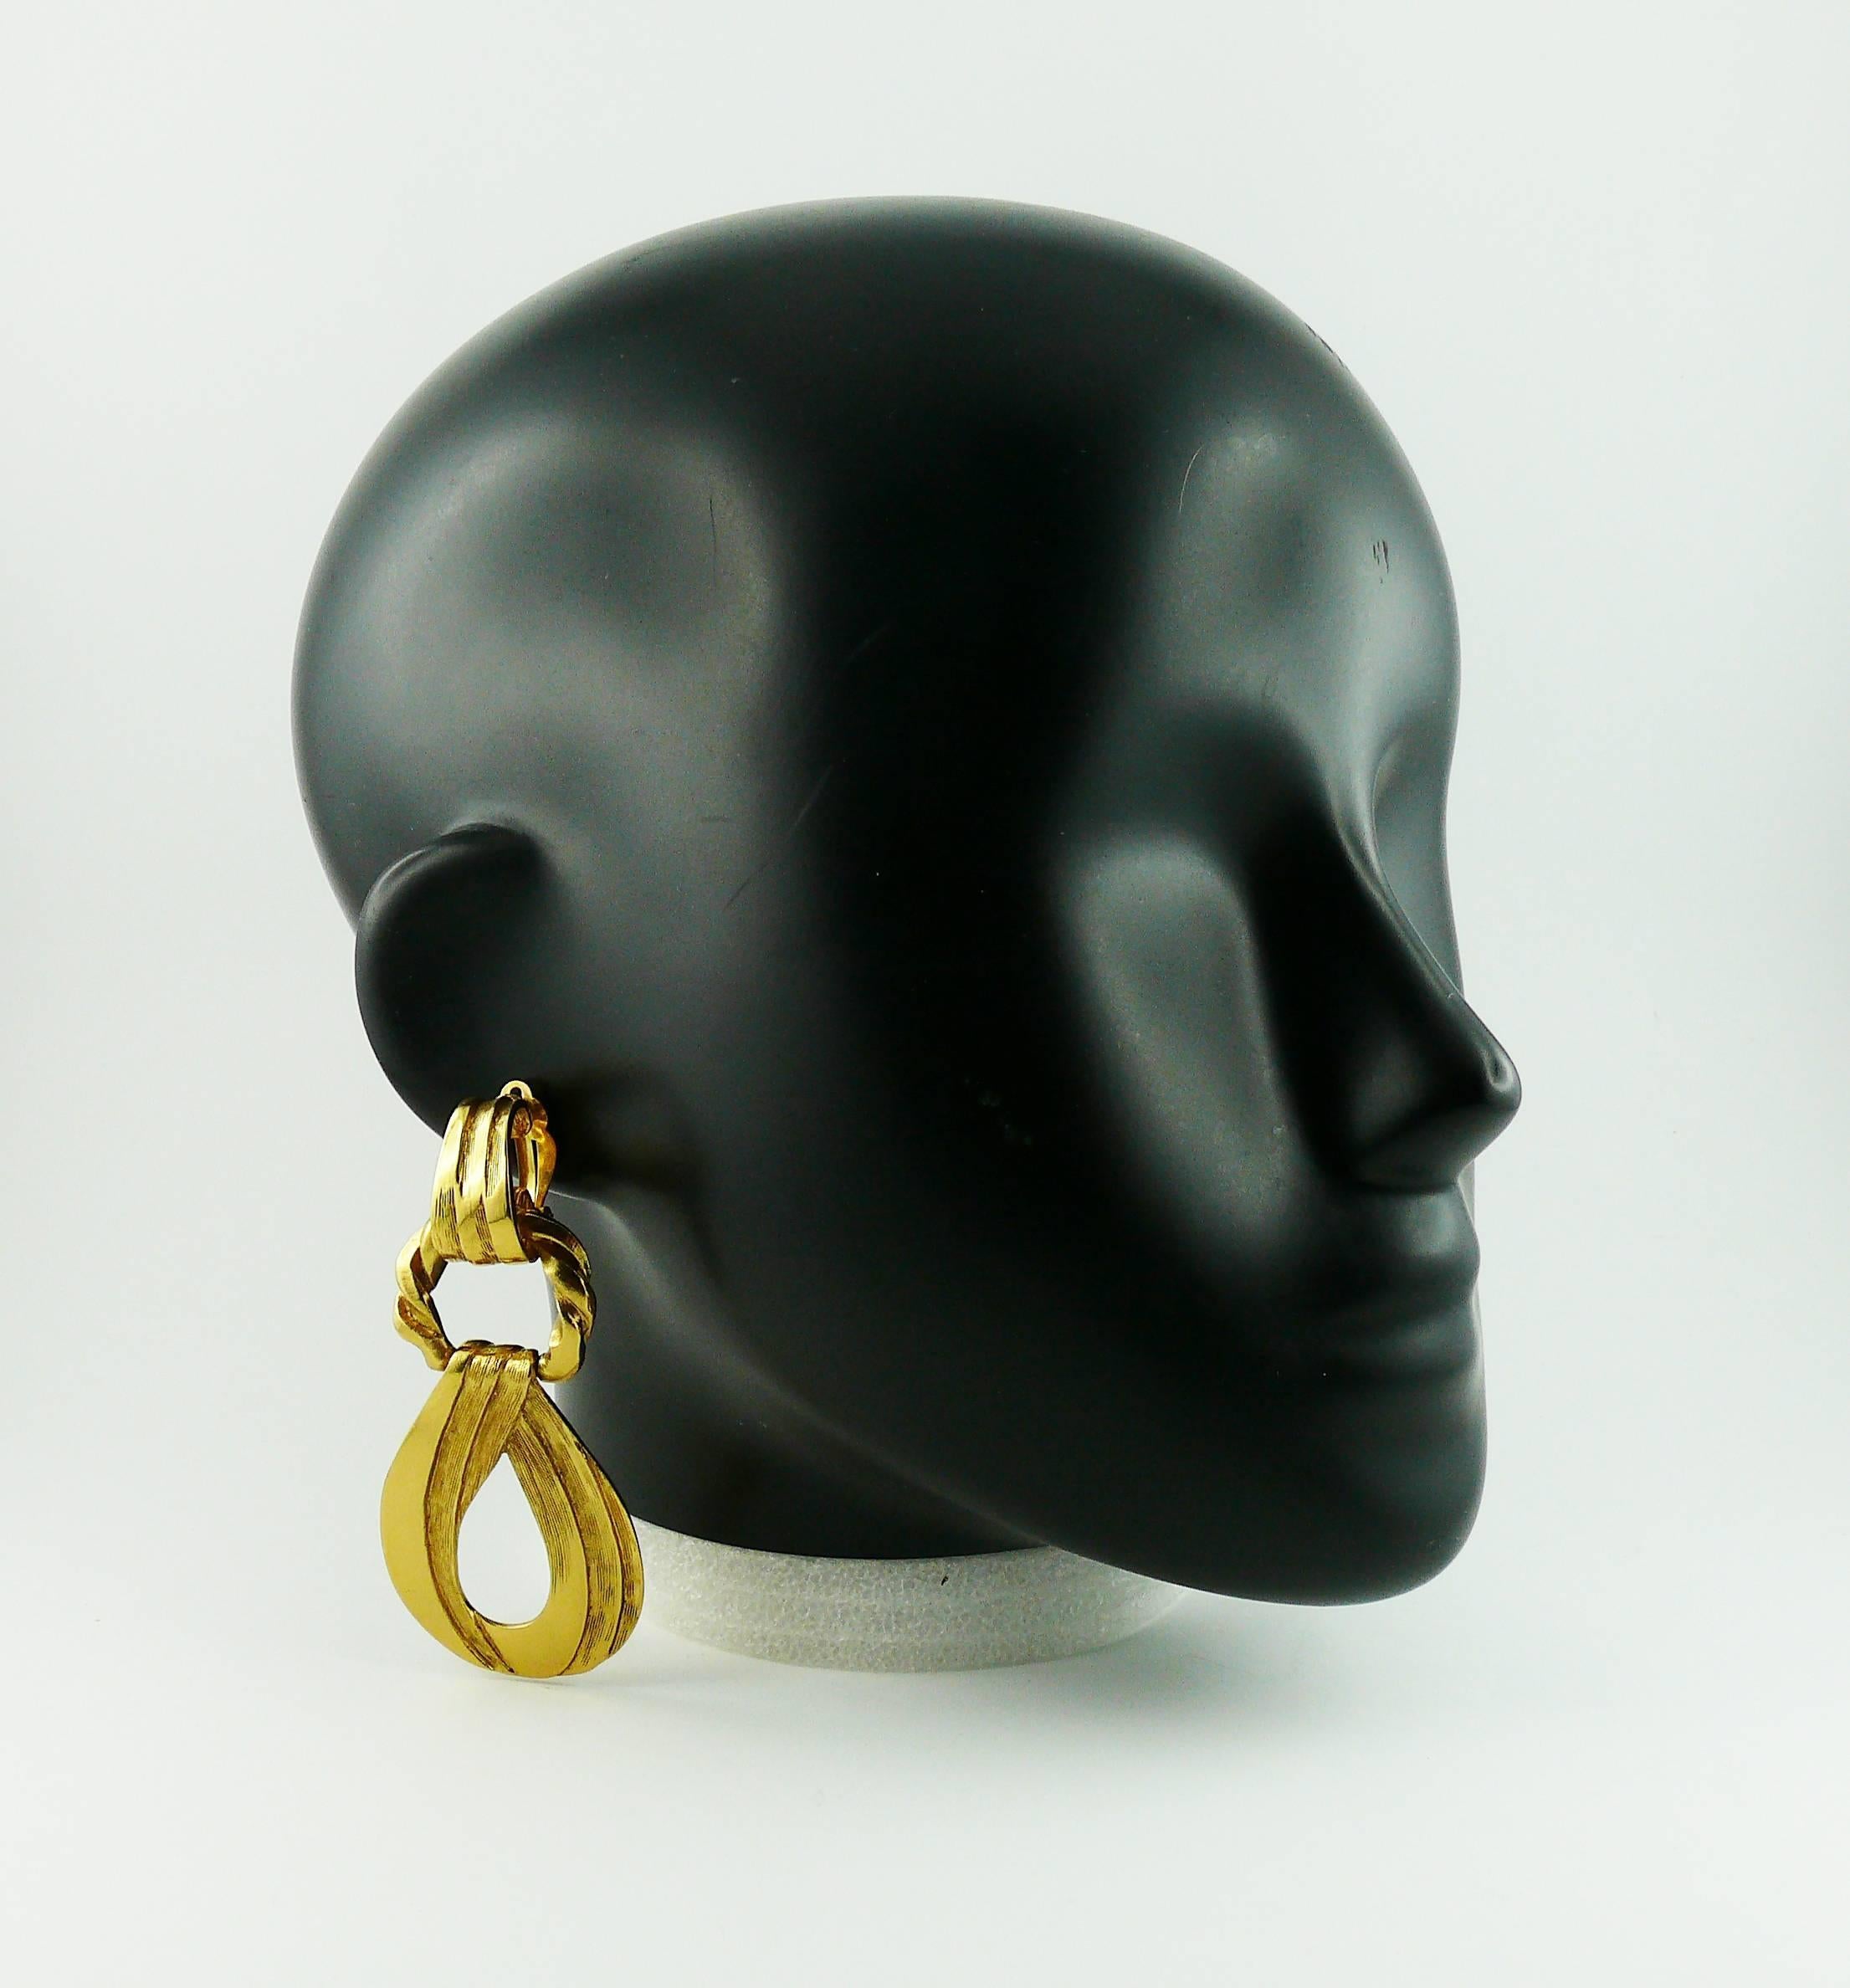 YVES SAINT LAURENT vintage gold toned dangling earrings (clip-on).

Marked YSL Made in France.

Indicative measurements : length approx. 7.6 cm (2.99 inches) / max. width approx. 3.7 cm (1.46 inches).

JEWELRY CONDITION CHART
- New or never worn :